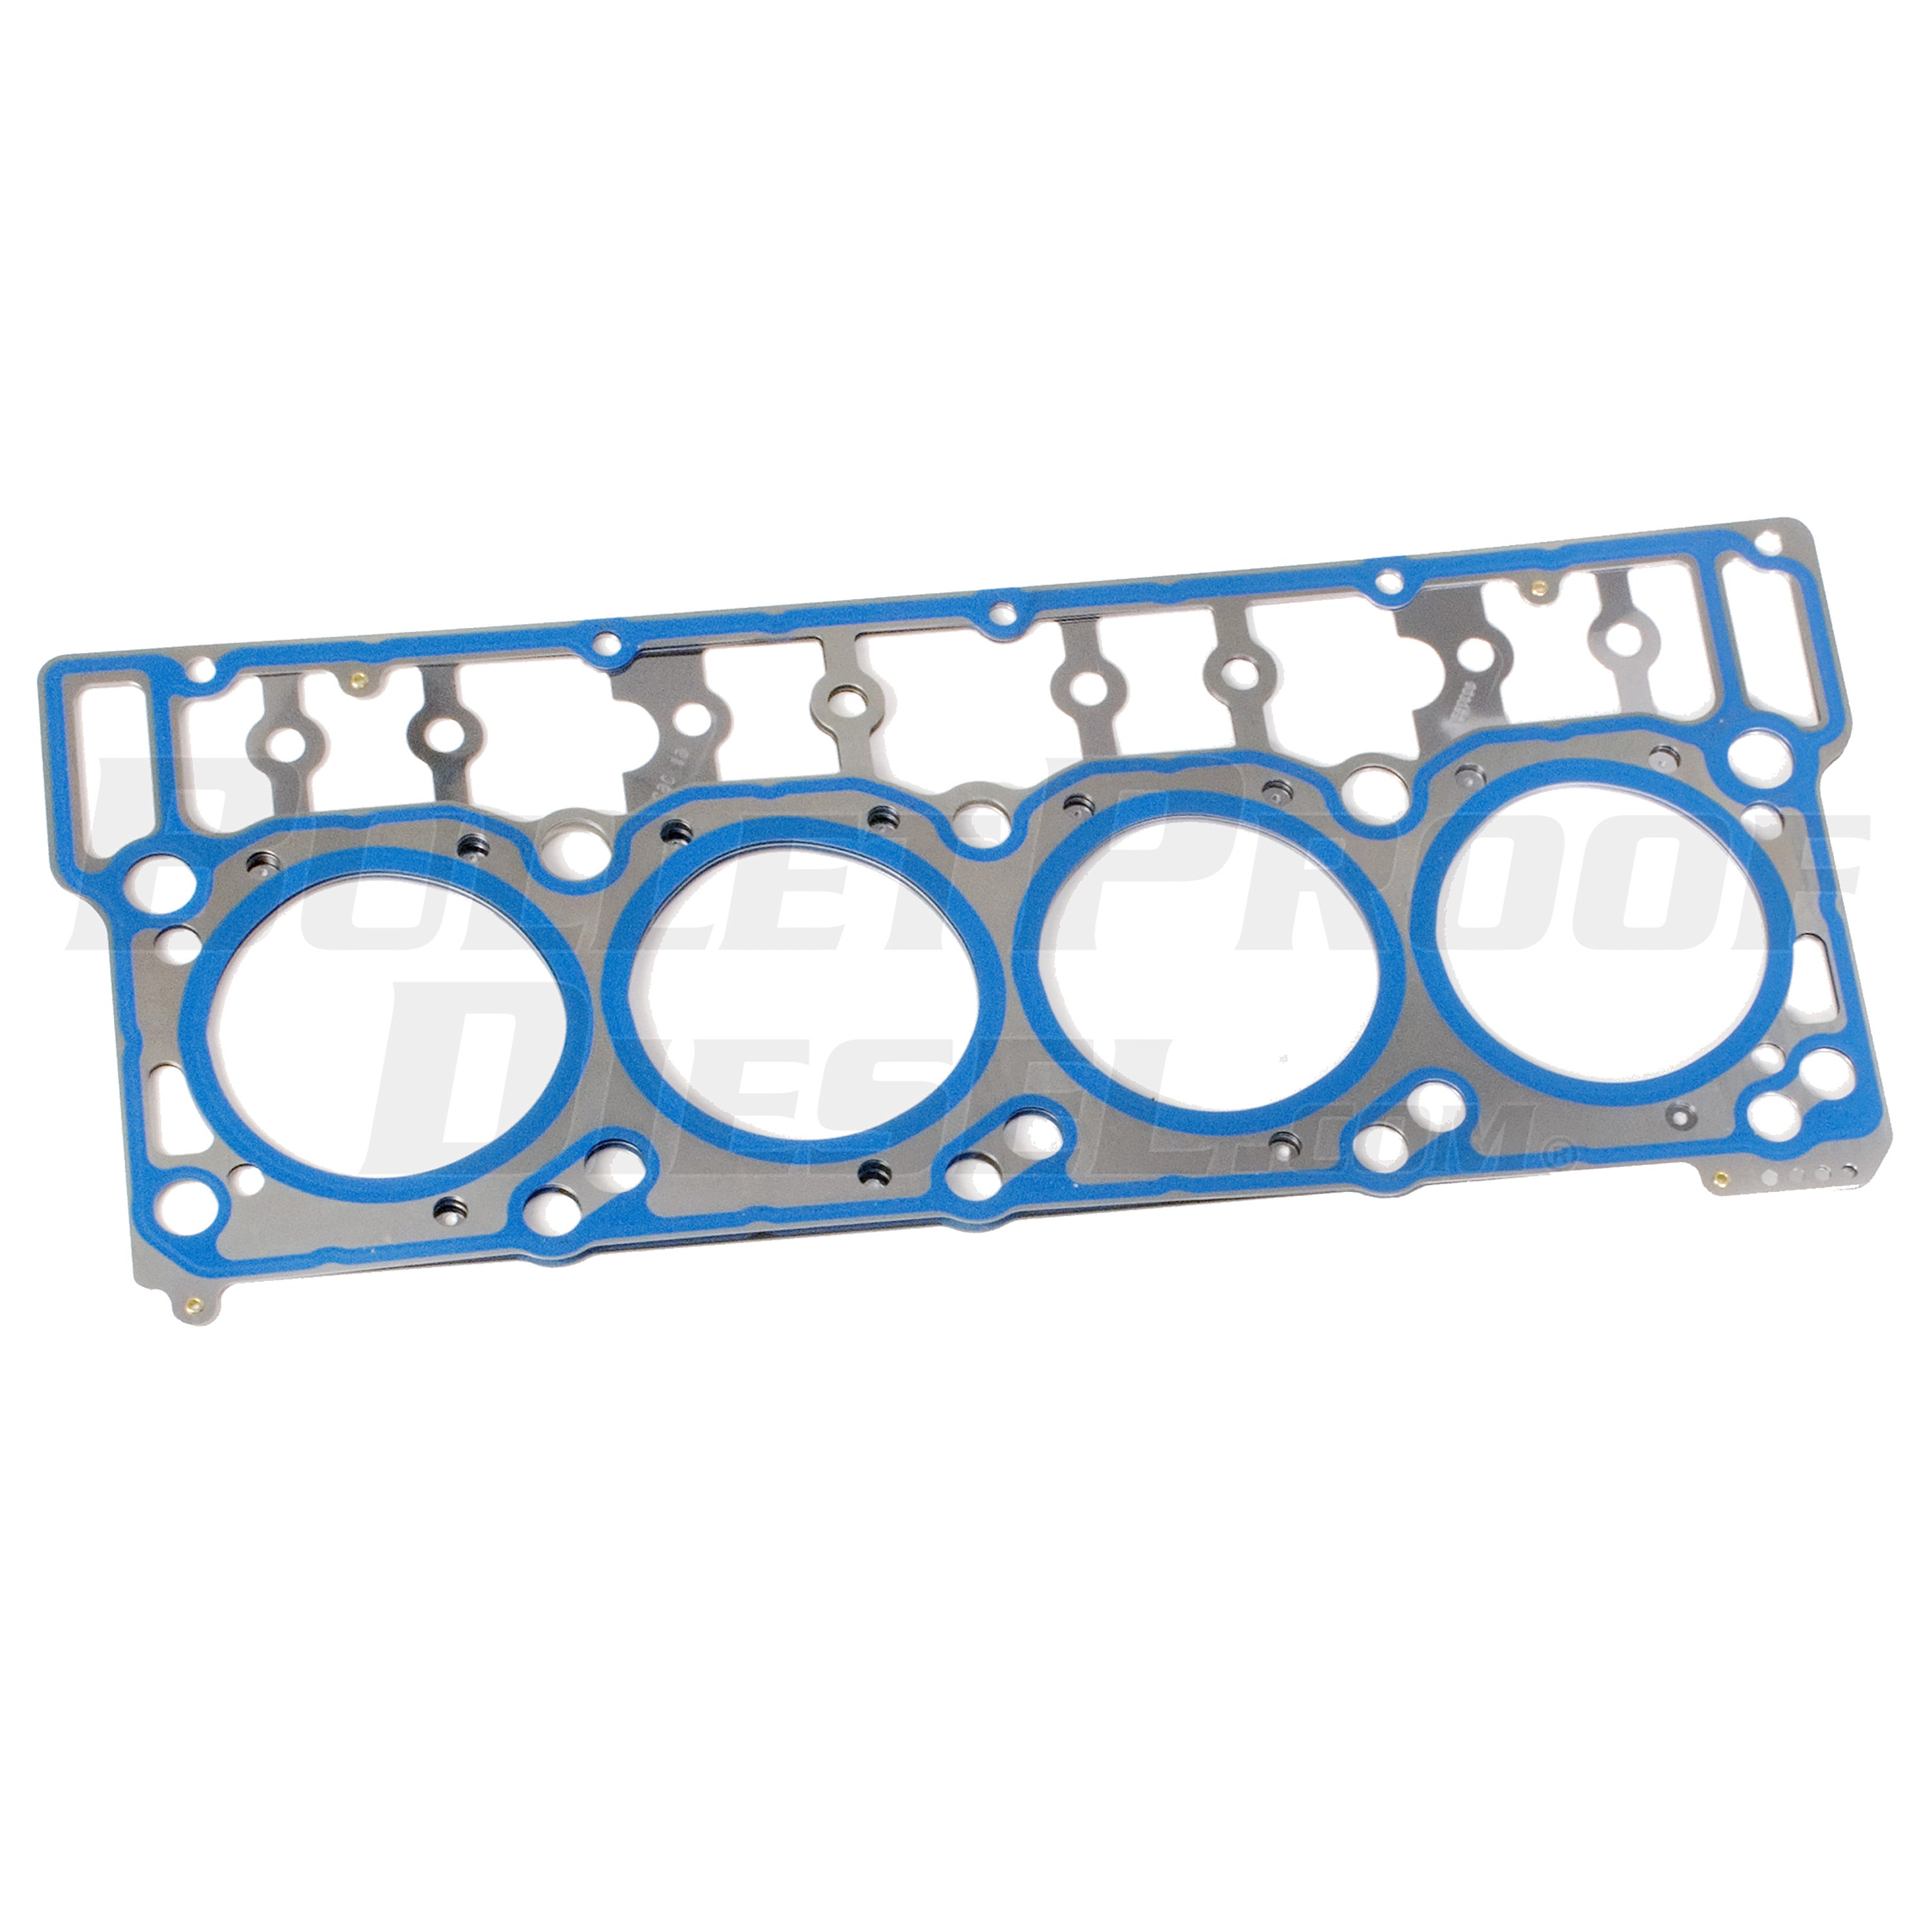 Head Gasket Install Complete Kit, 2006+ Ford 6.0L, Ford Head Gaskets 20mm Dowel, NO ARP STUDS